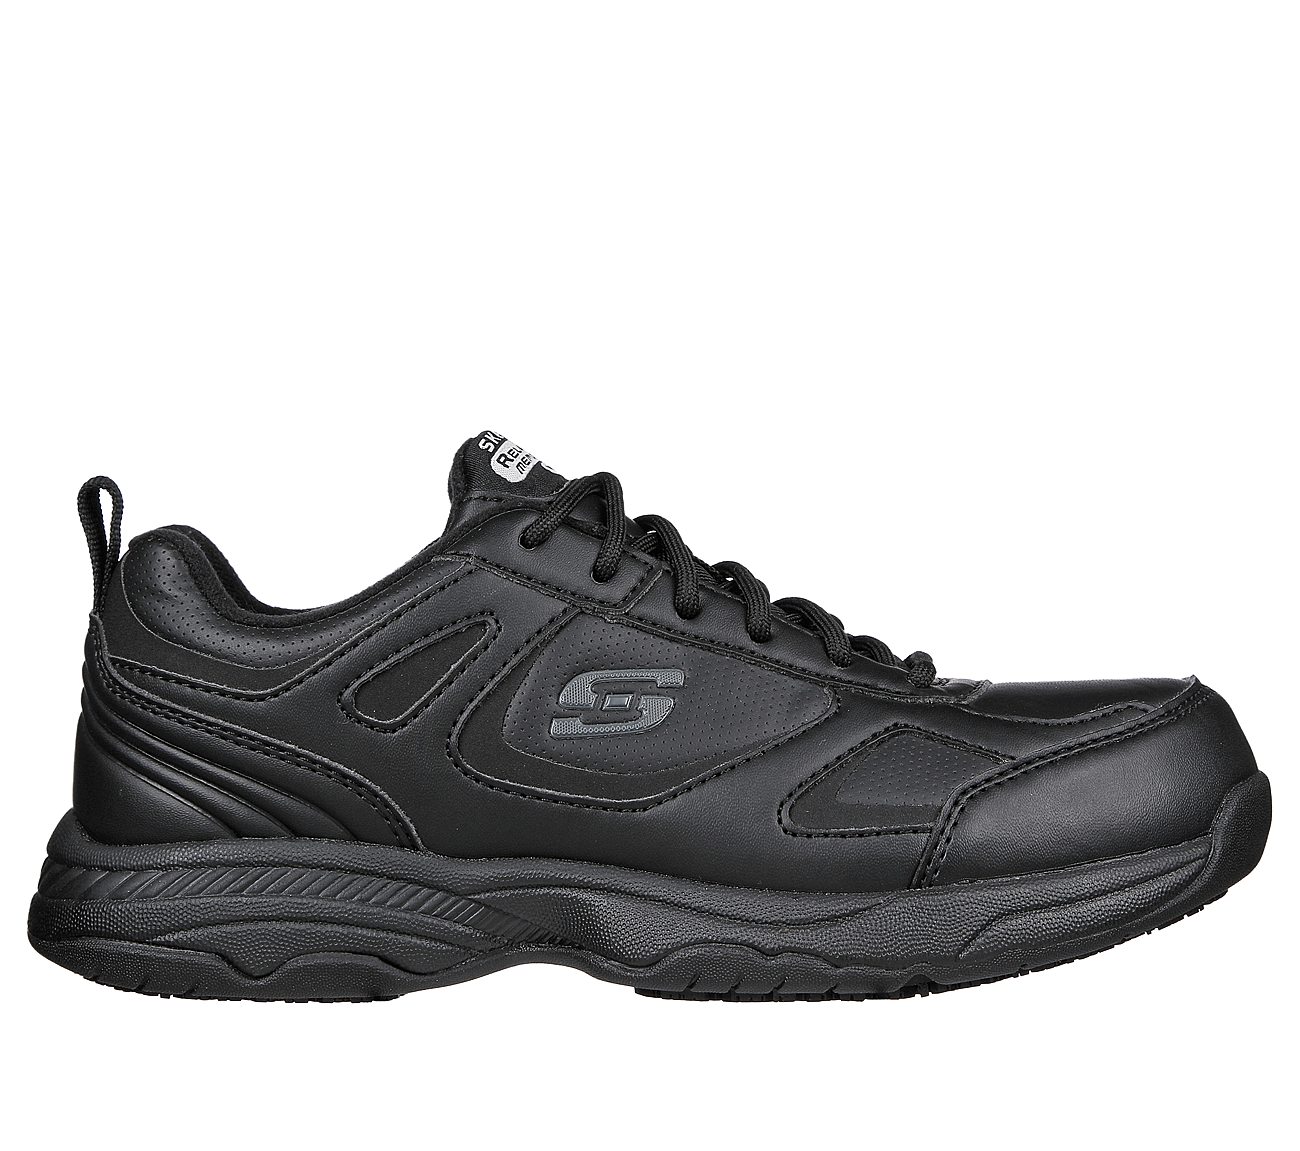 skechers work shoes for standing all day